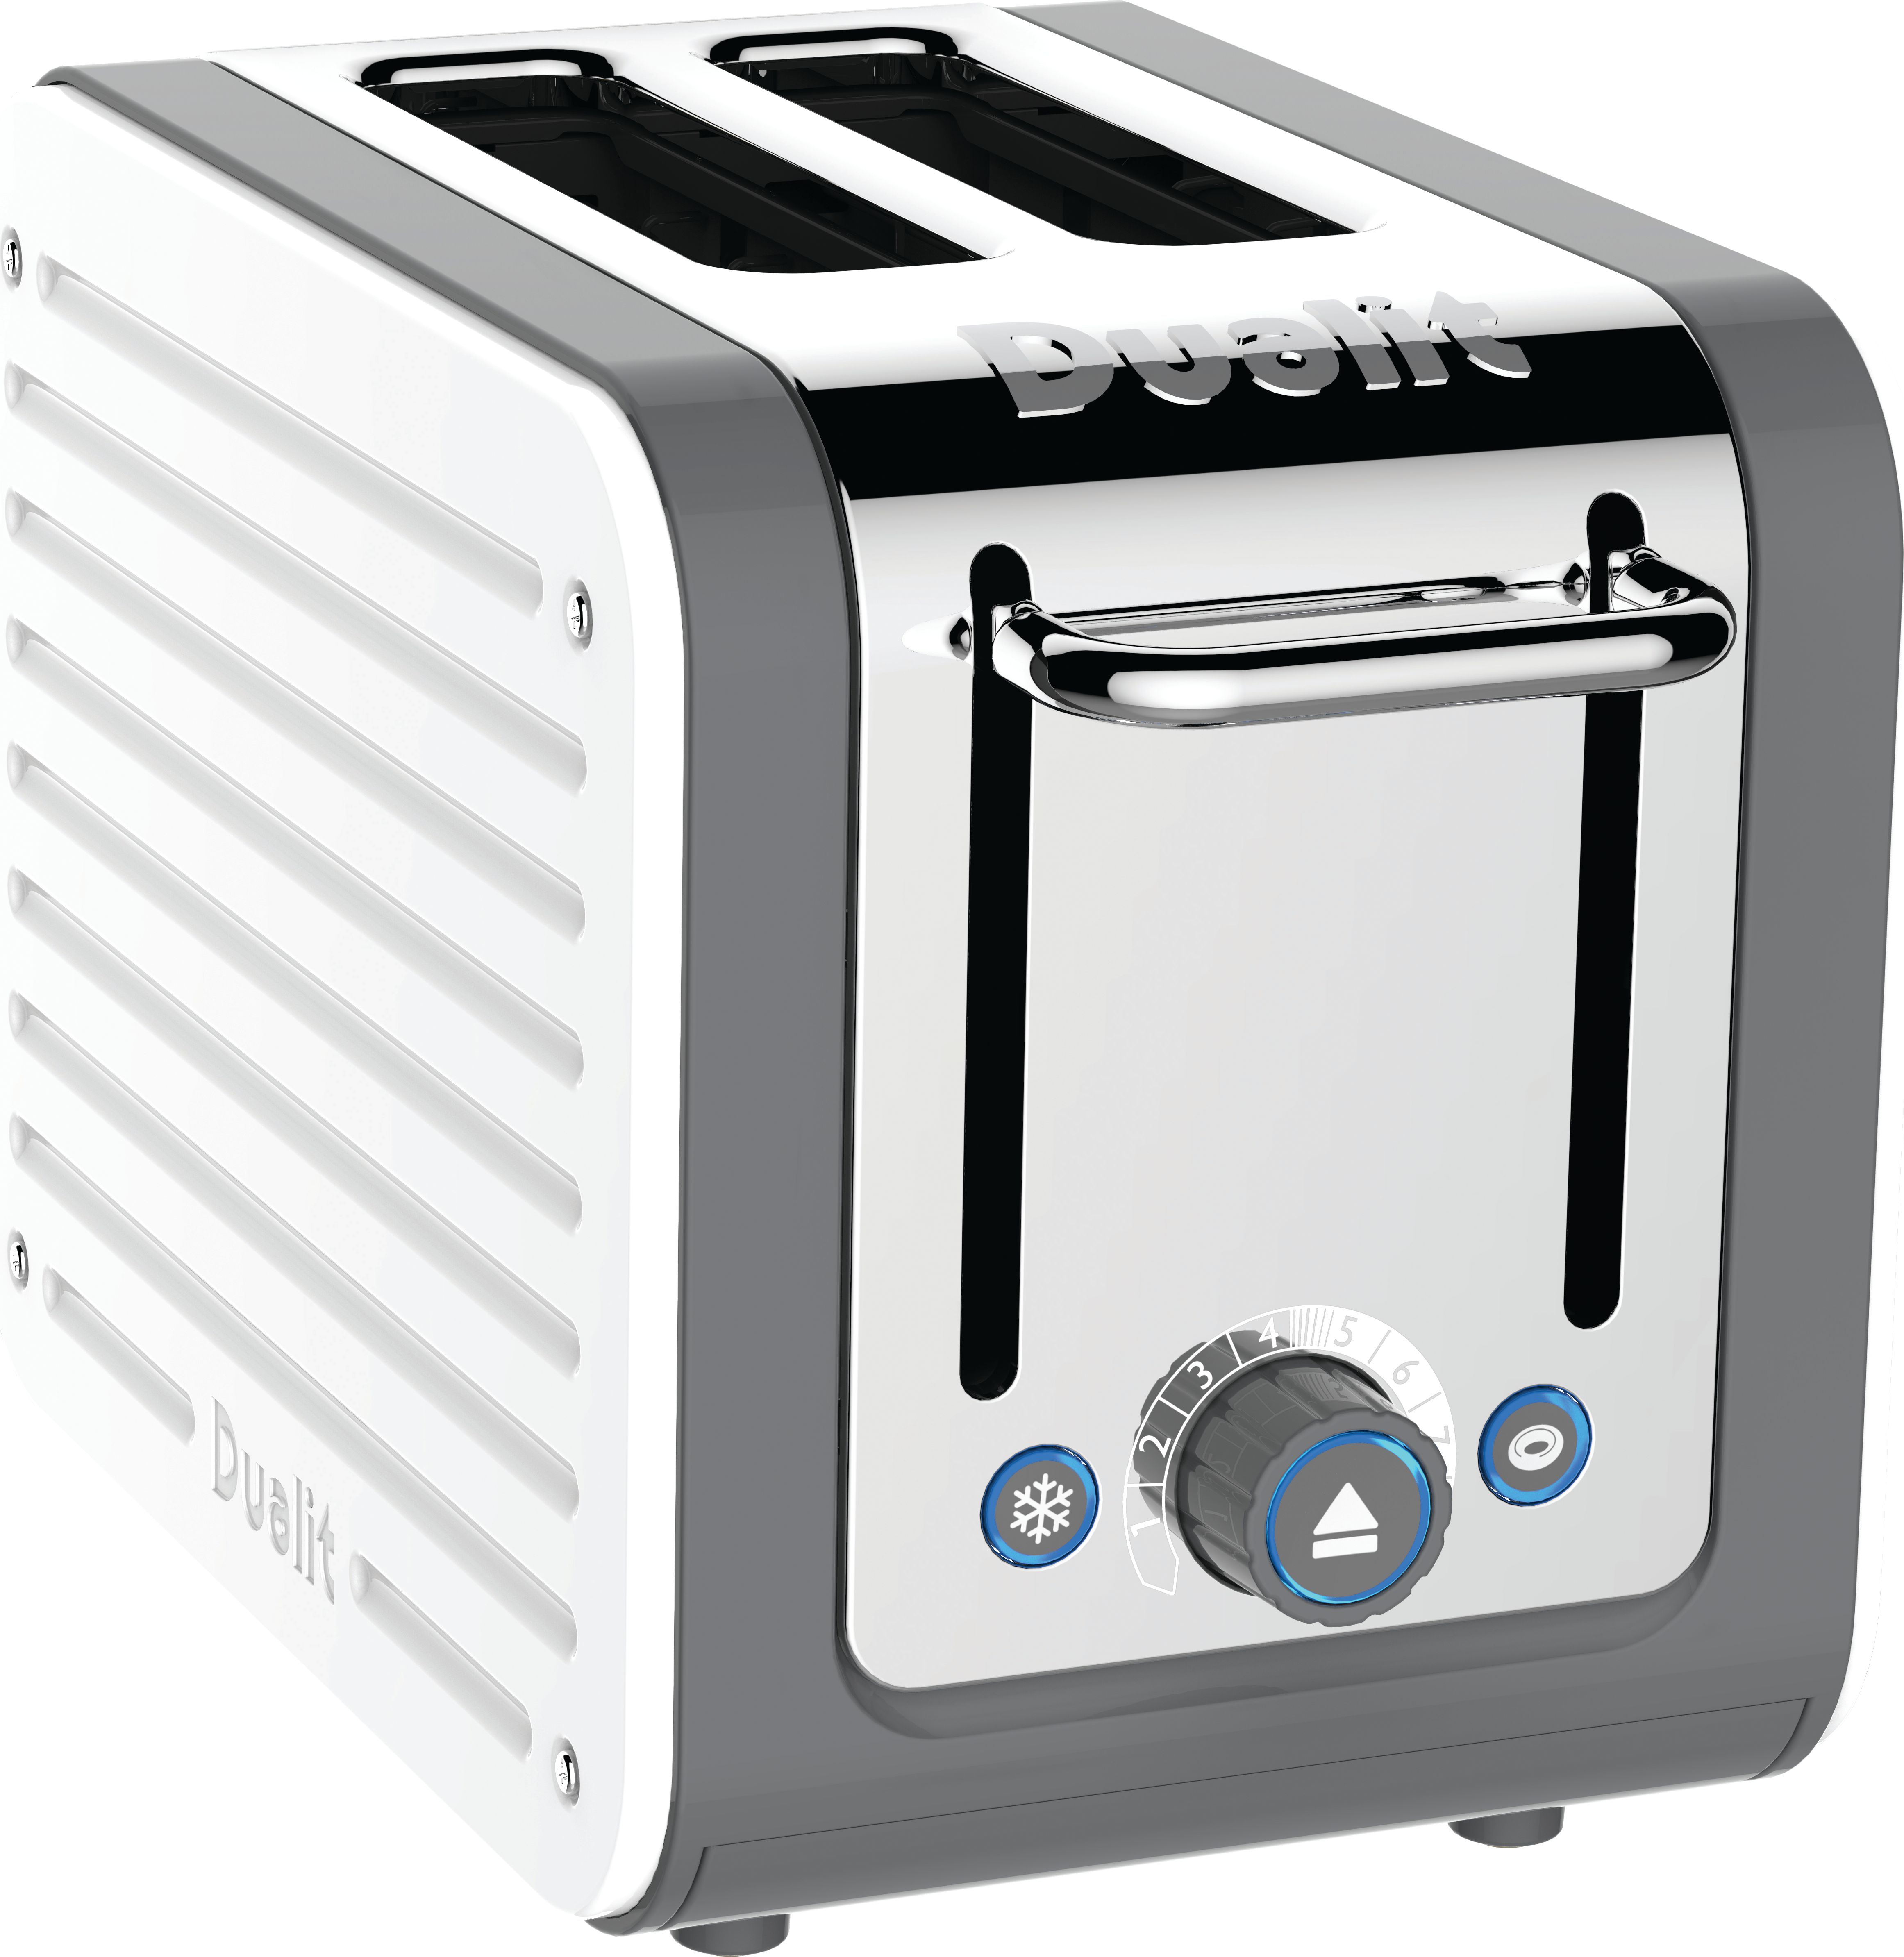 Dualit Architect 26526 2 Slice Toaster - Stainless Steel, Stainless Steel